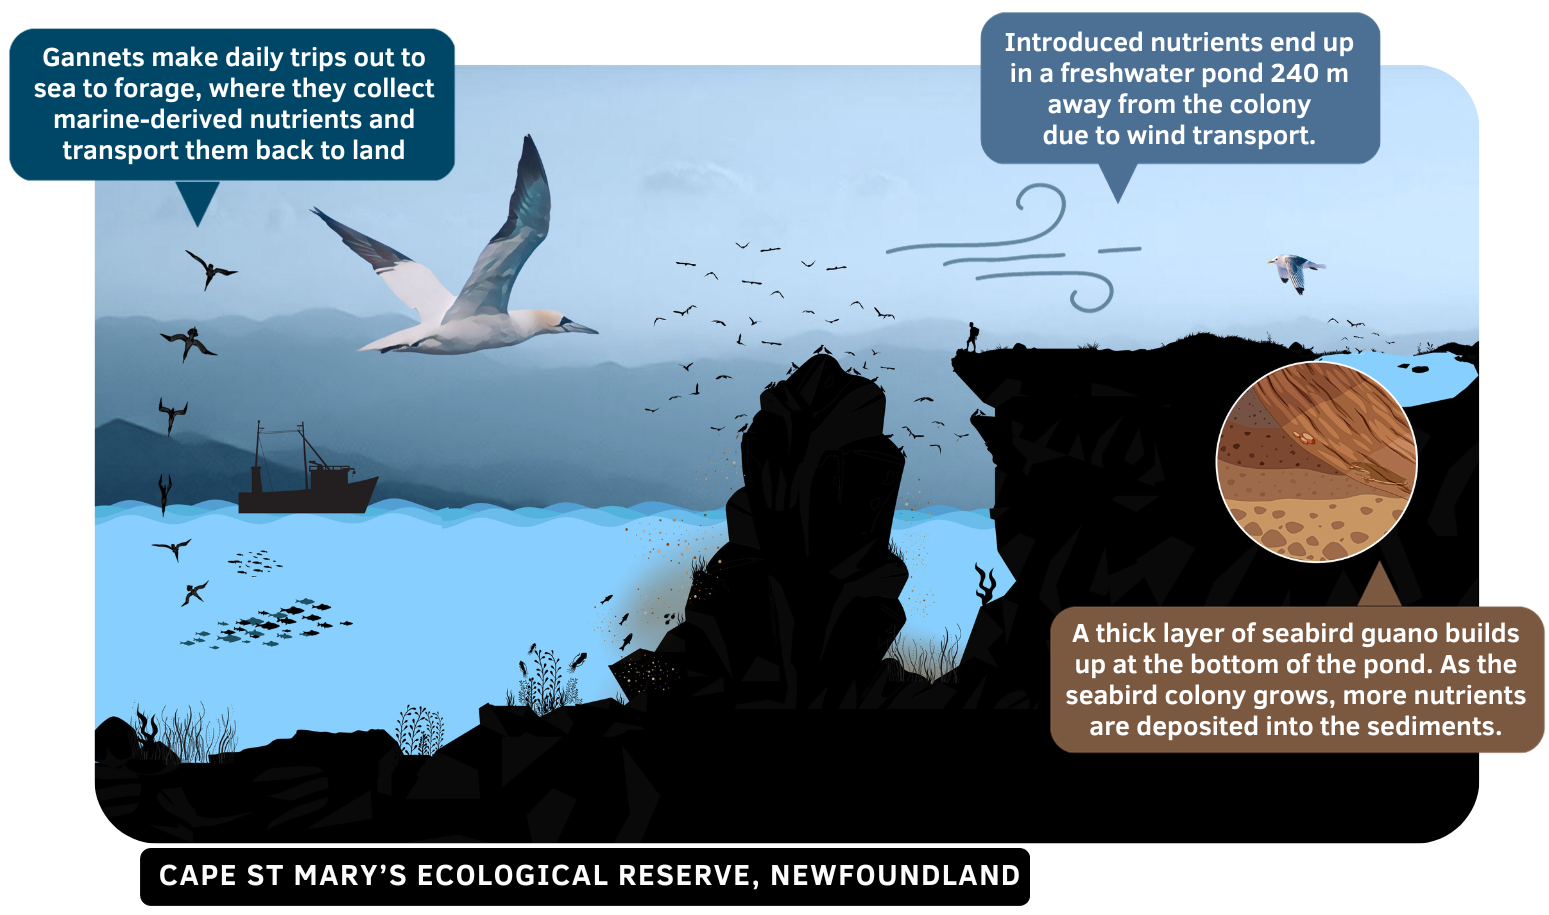 Seabird nutrient transfer from Bird Rock, in Cape St. Mary's Ecological Reserve (Newfoundland) to a pond 240 m away from the seabird colony. Seen in the illustration are northern gannets (Morus bassanus) and black-legged kittiwakes (Rissa tridactyla), which both nest within the Reserve on an annual basis